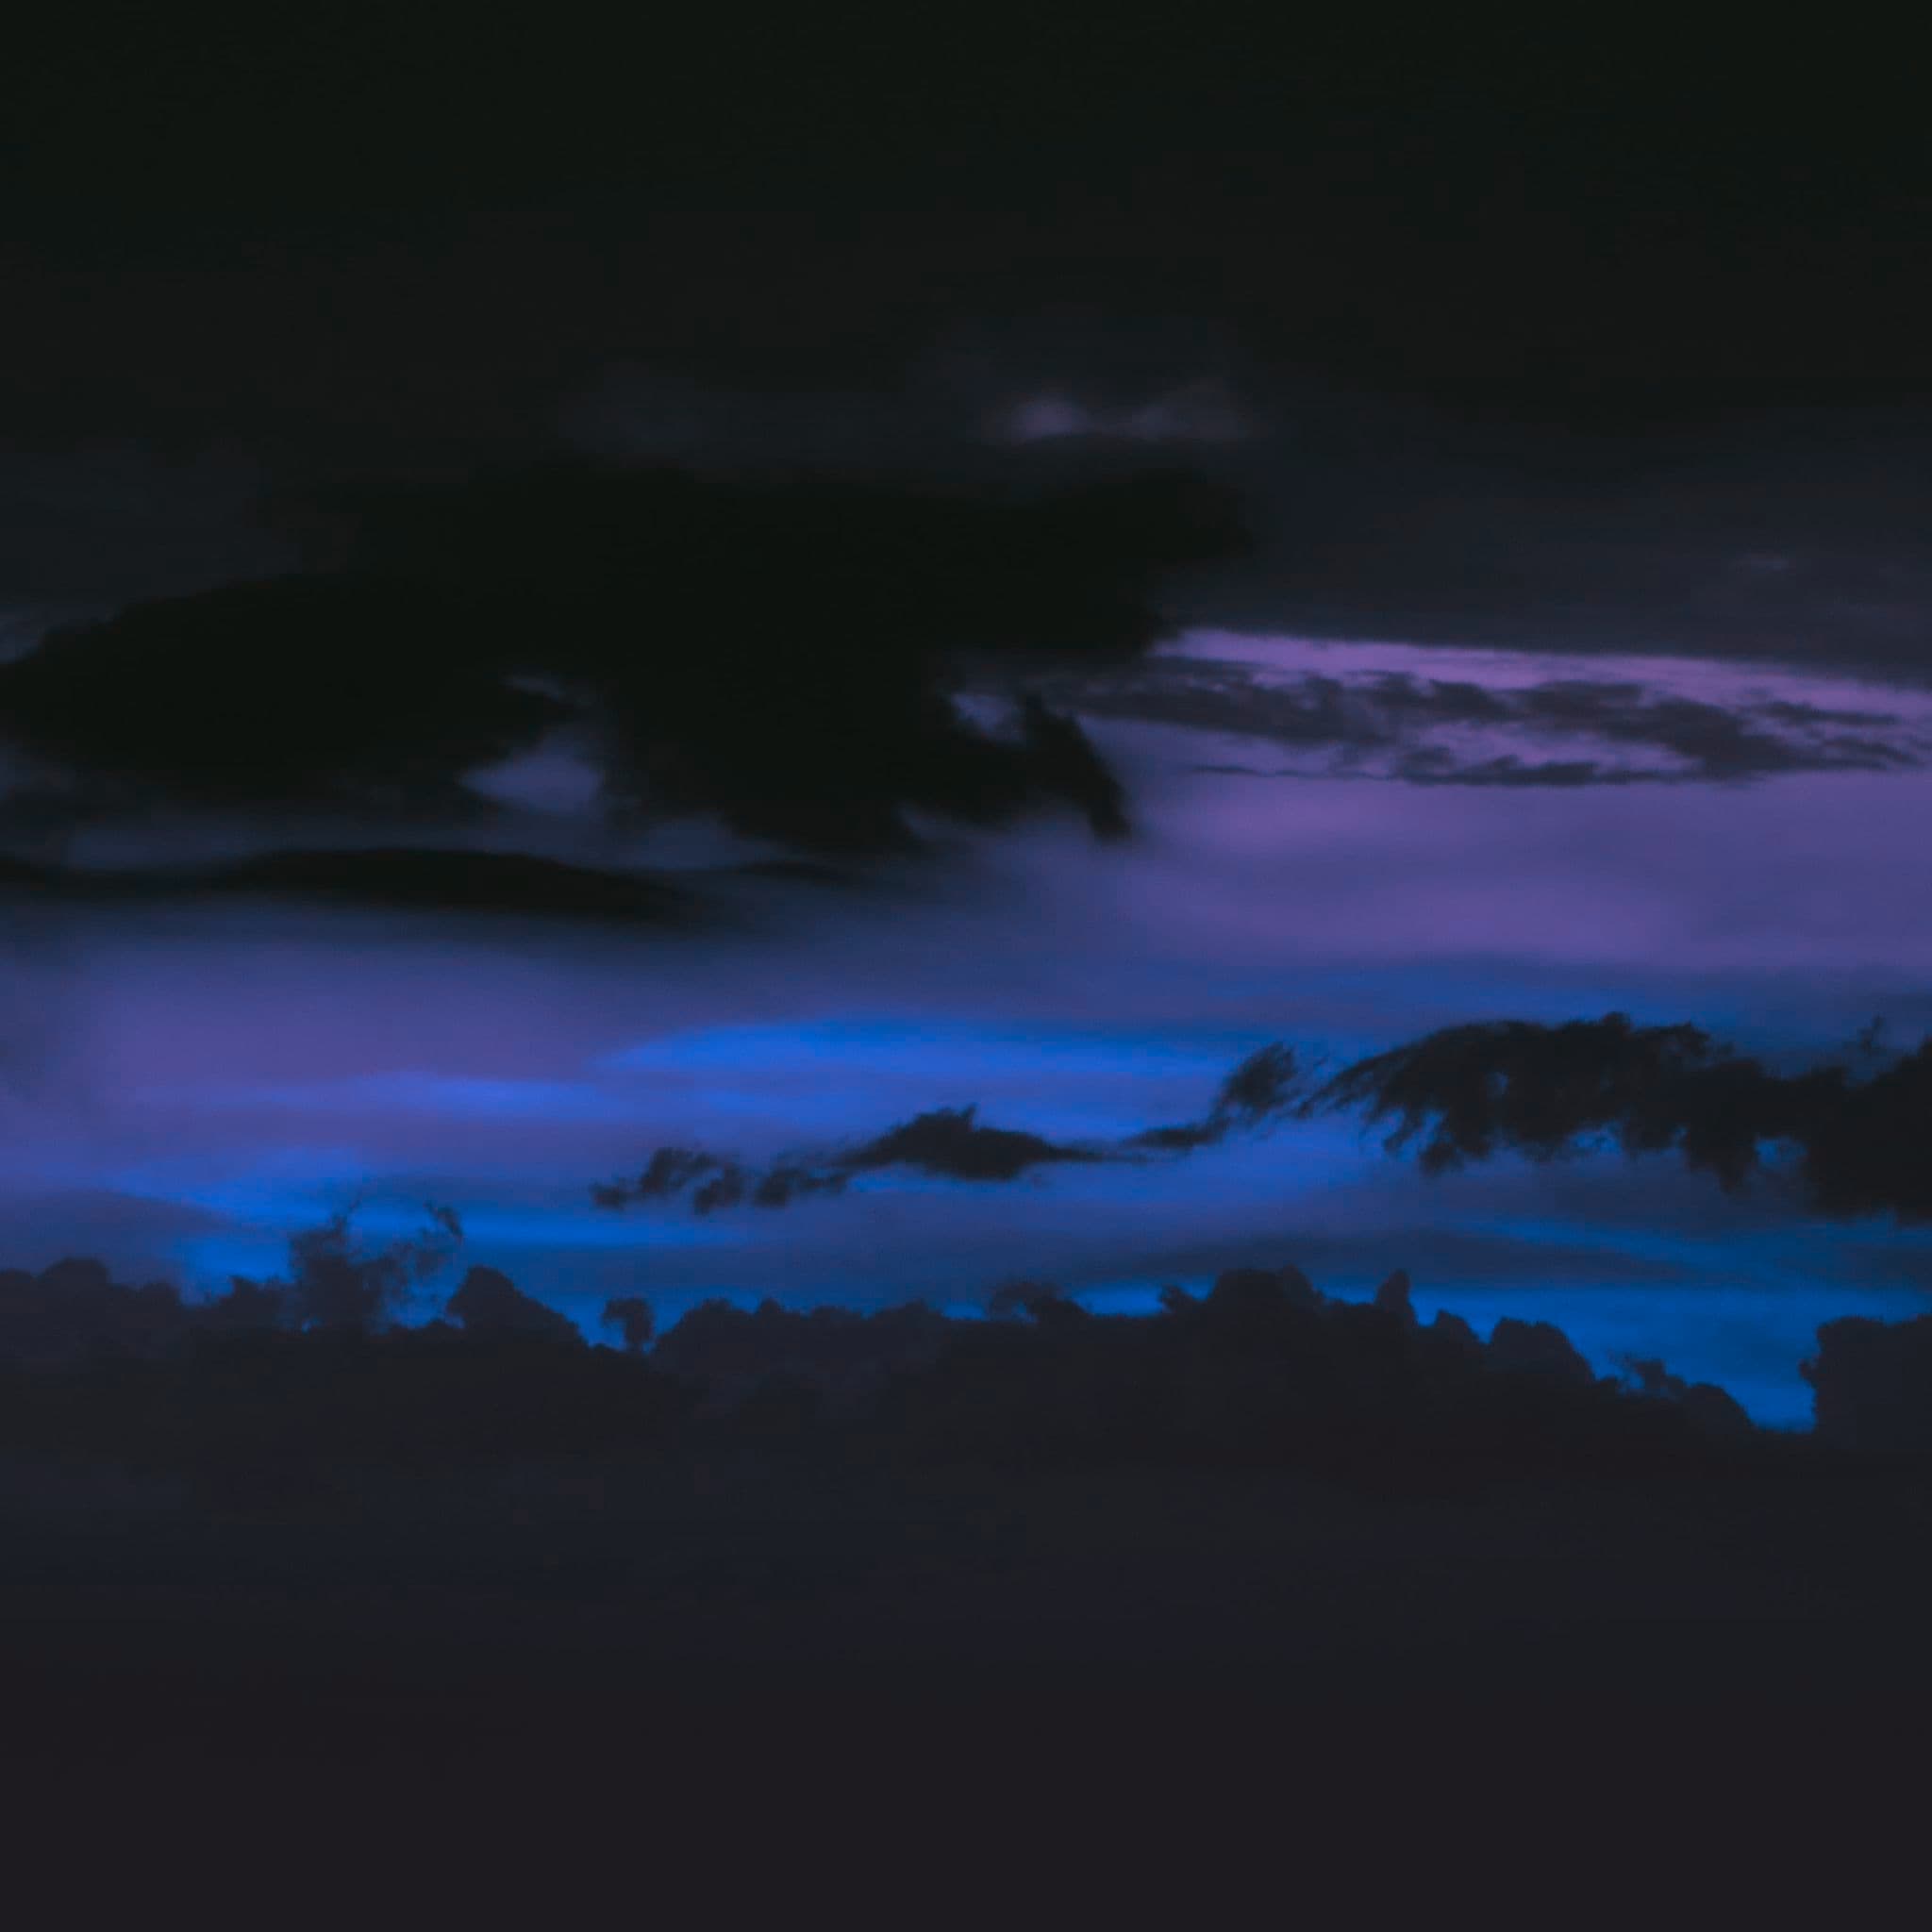 a picture i took of a sunset, but hue-shifted to be blue and purple